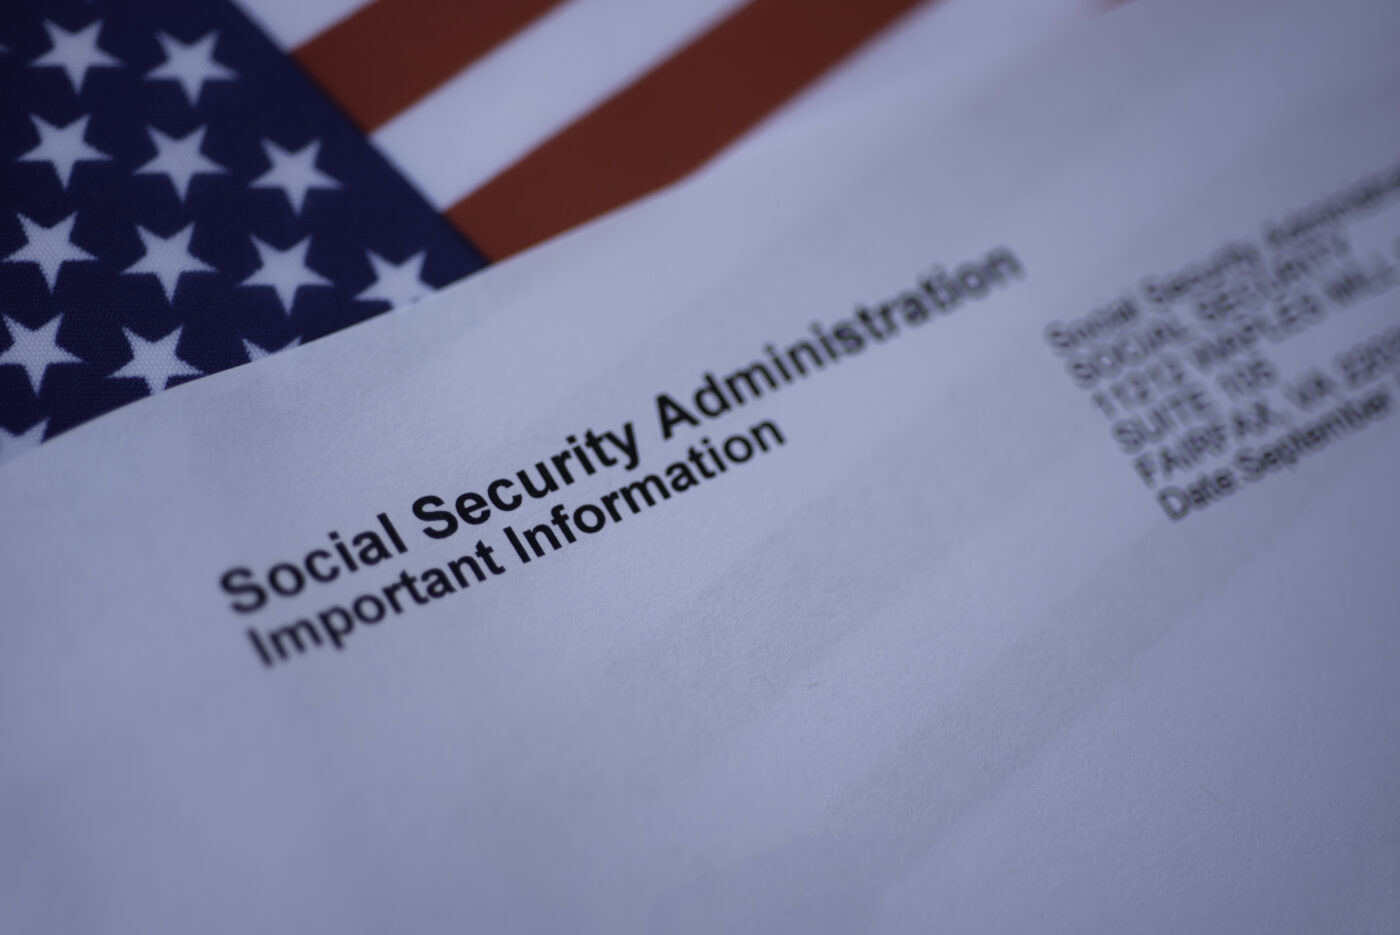 COVID-19 is Affecting Social Security Benefits: Here’s What You Can Do About It